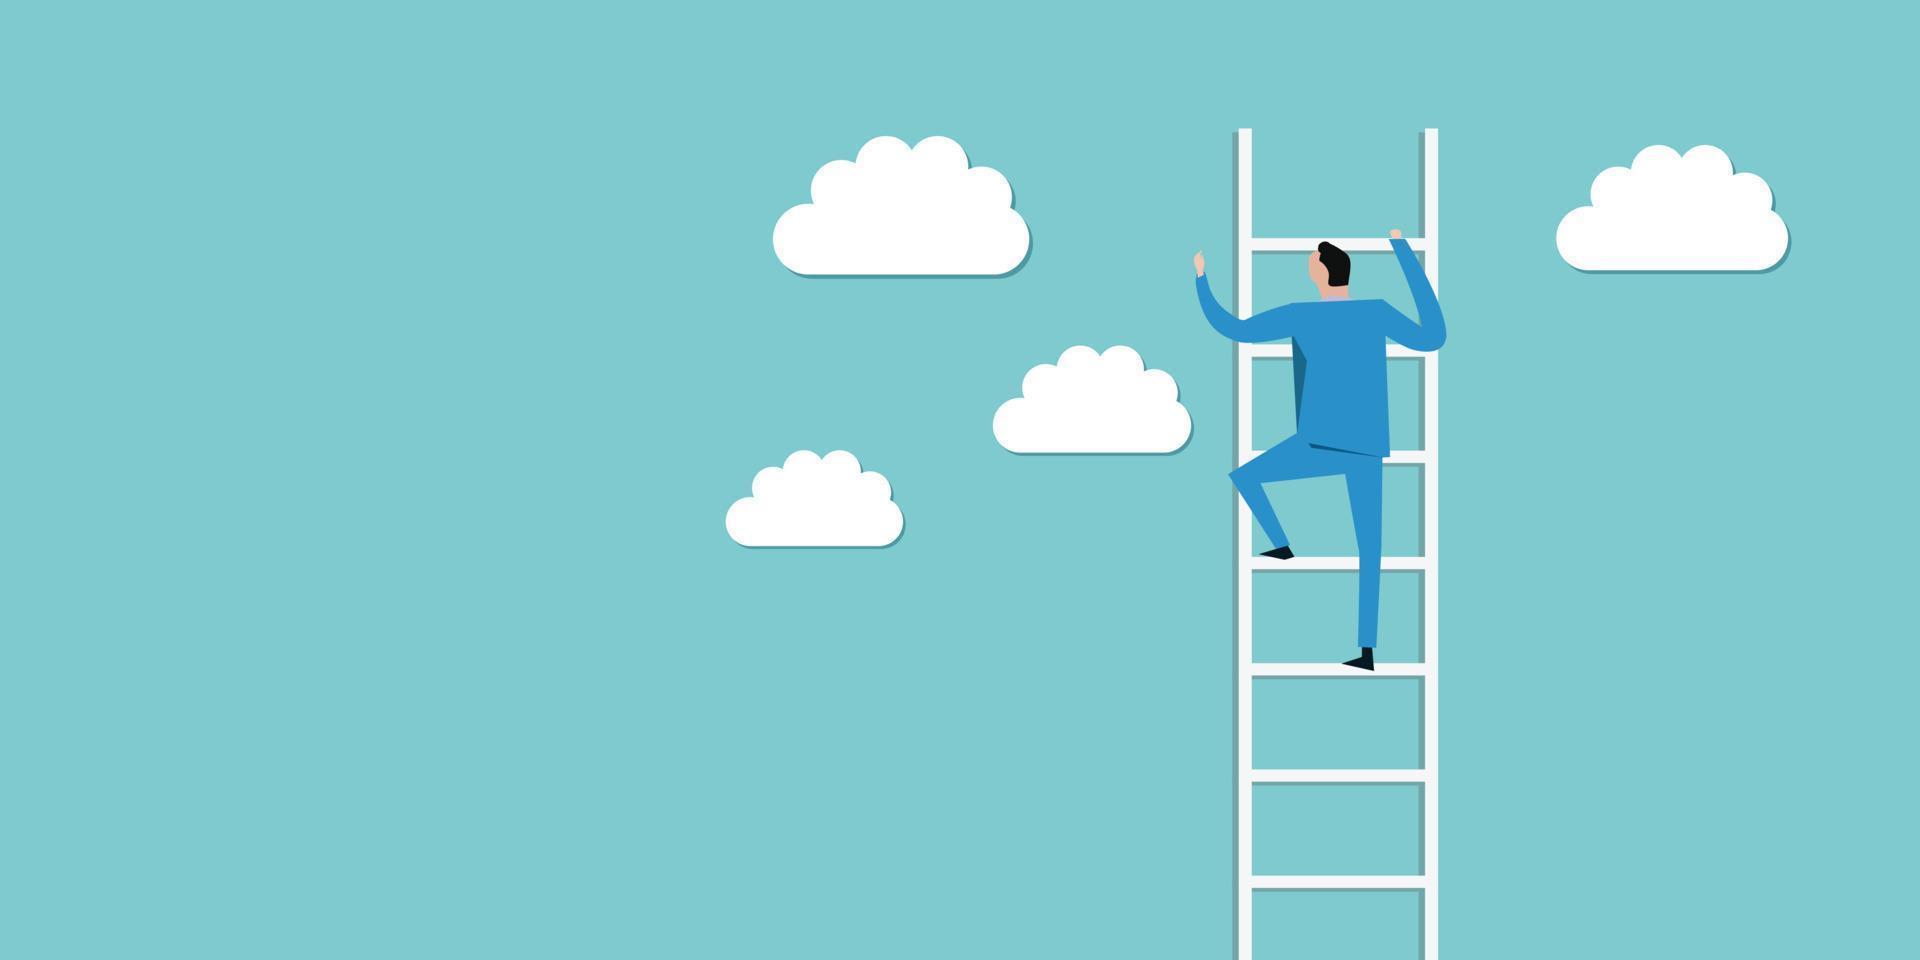 Man on stairs on the cloud for success illustration background vector